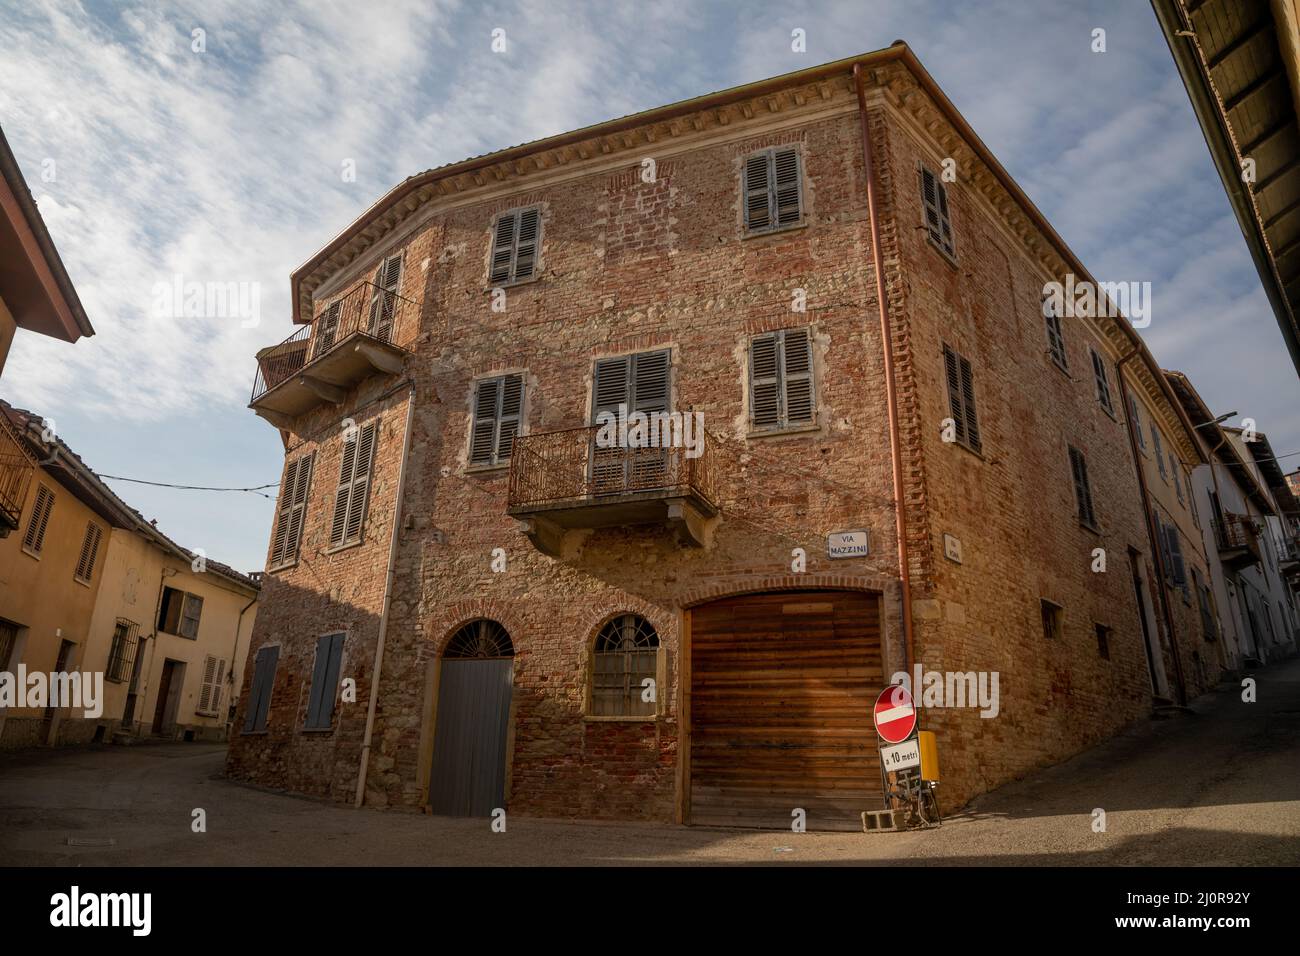 Old building in Cortanze, Italy Stock Photo